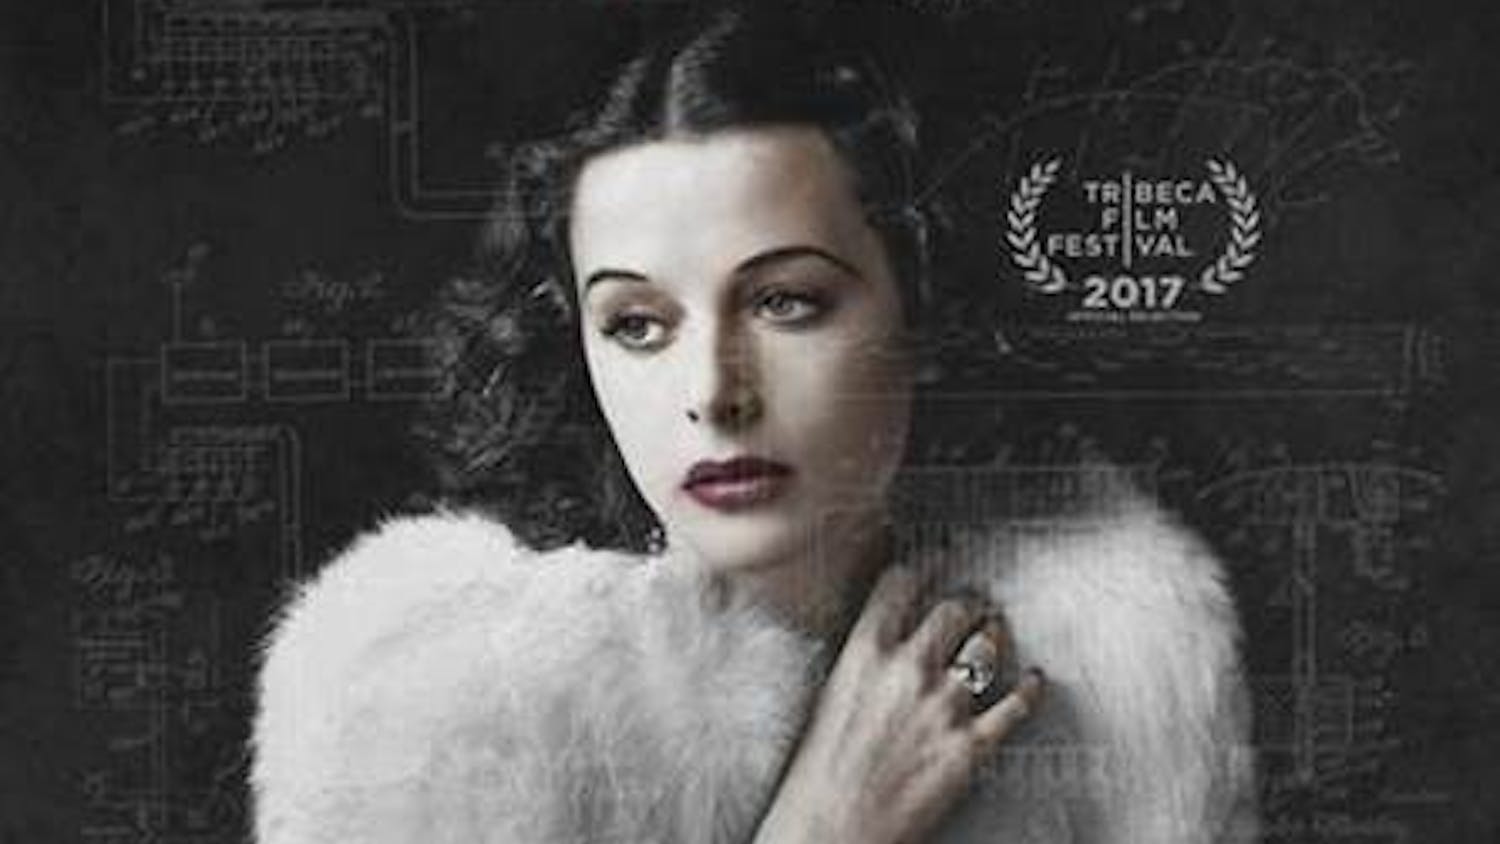 "Bombshell: The Hedy Lamarr Story" opens March 2.